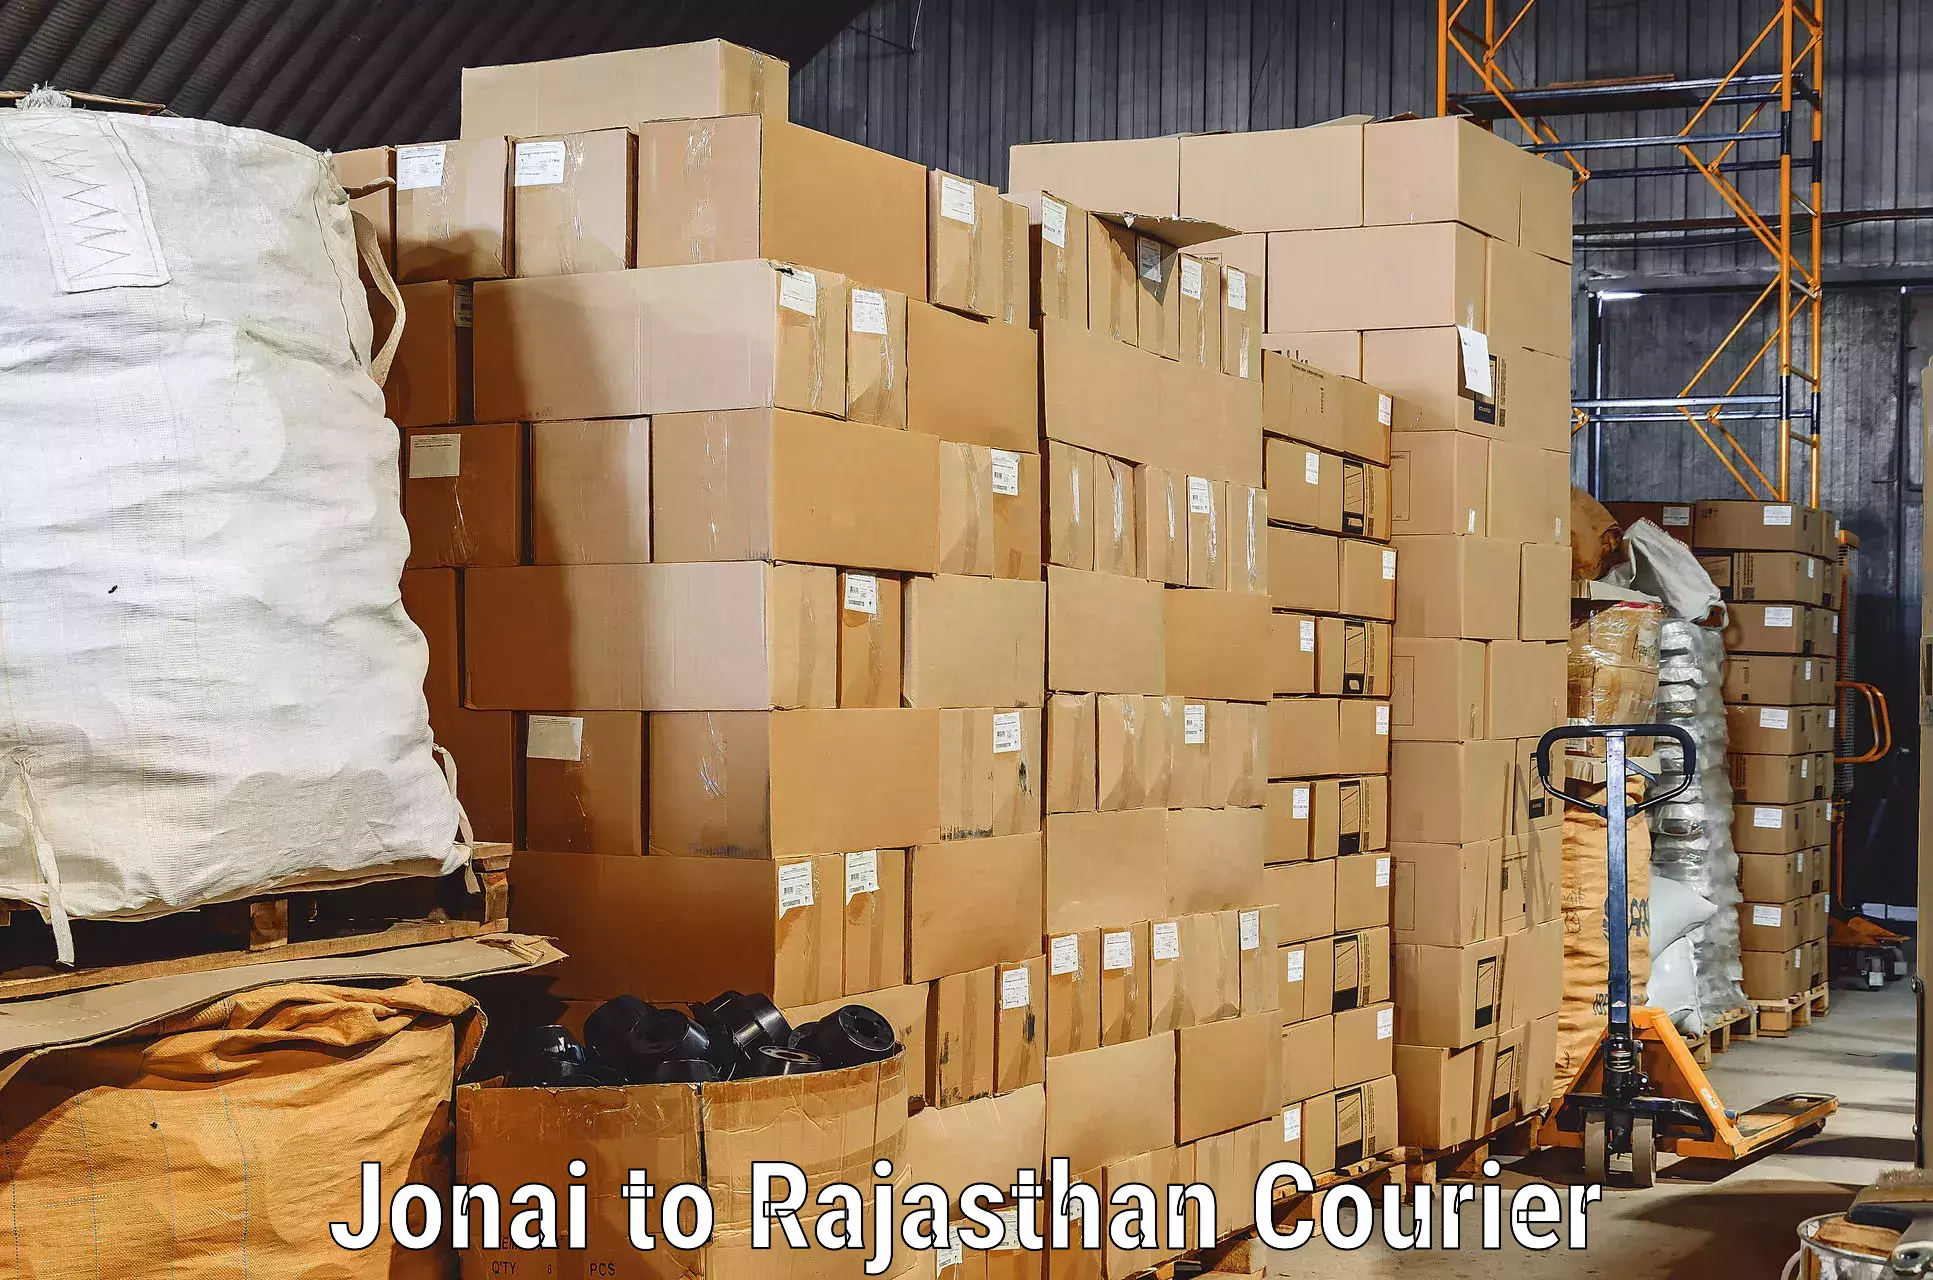 Trusted relocation experts Jonai to Rajasthan